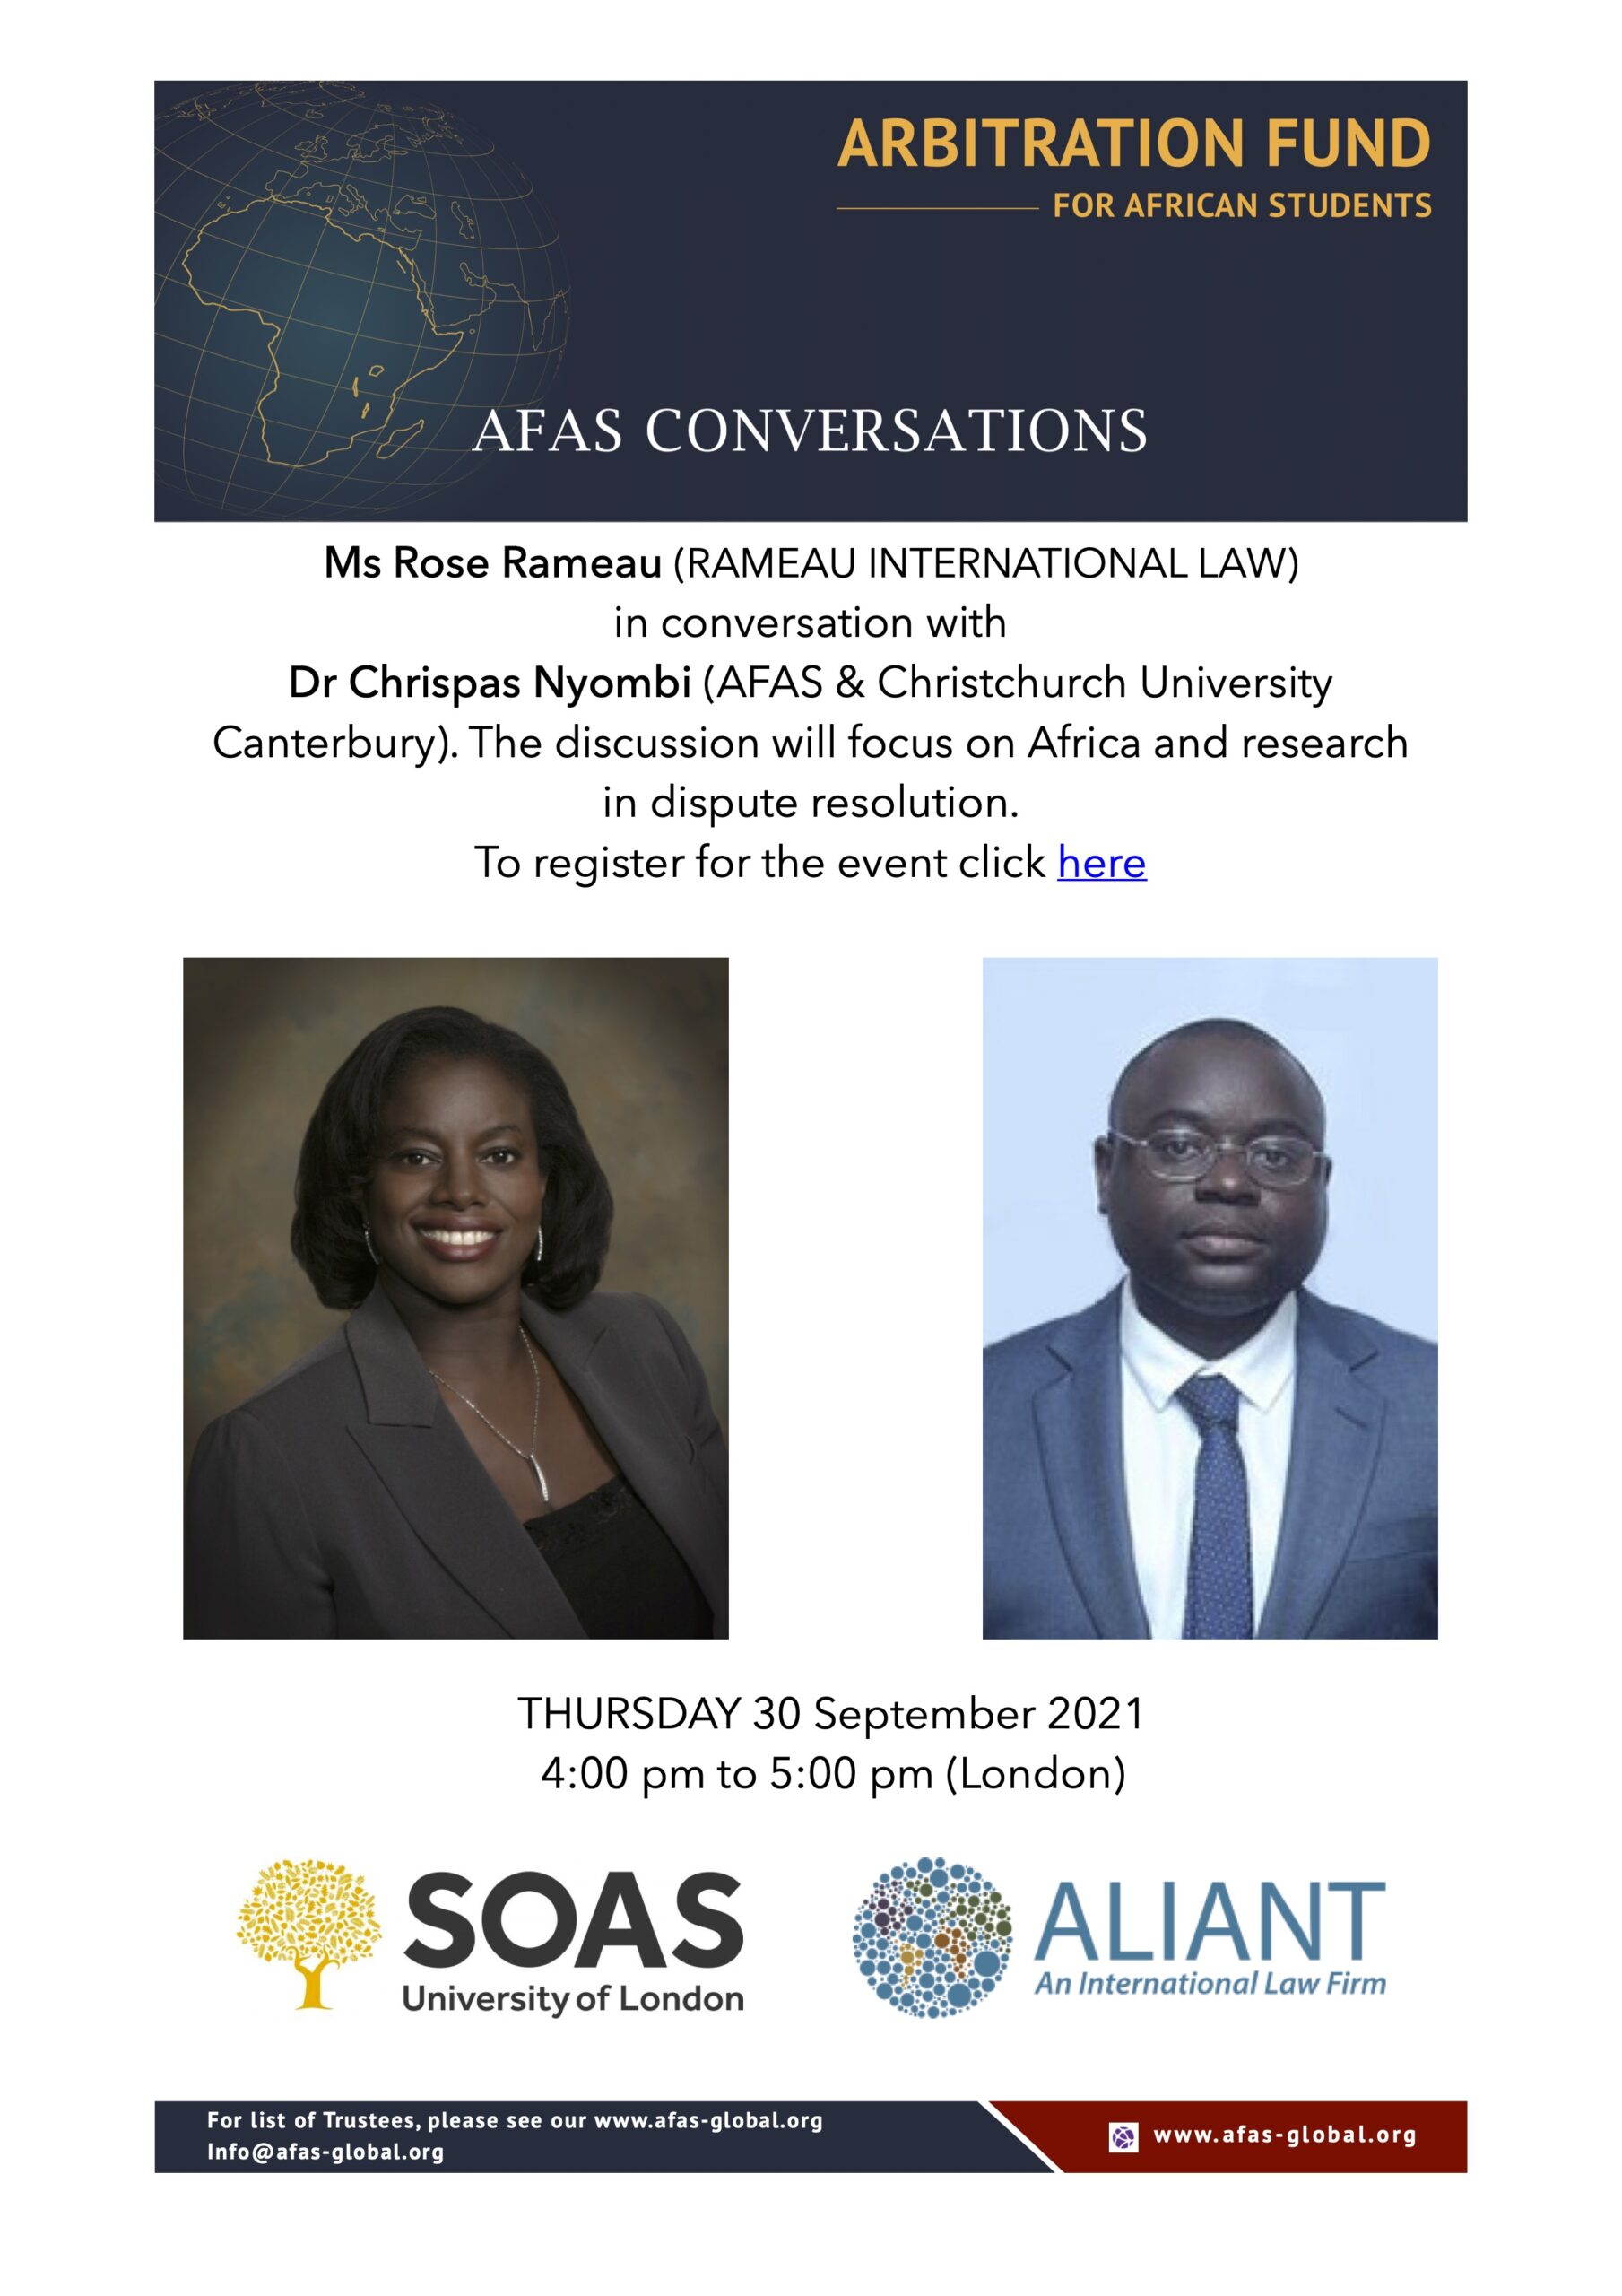 September 30th: Ms Rose Rameau will be in conversation with Dr Chrispas Nyombi of Christchurch University on PhD research and its relevance to Africa.